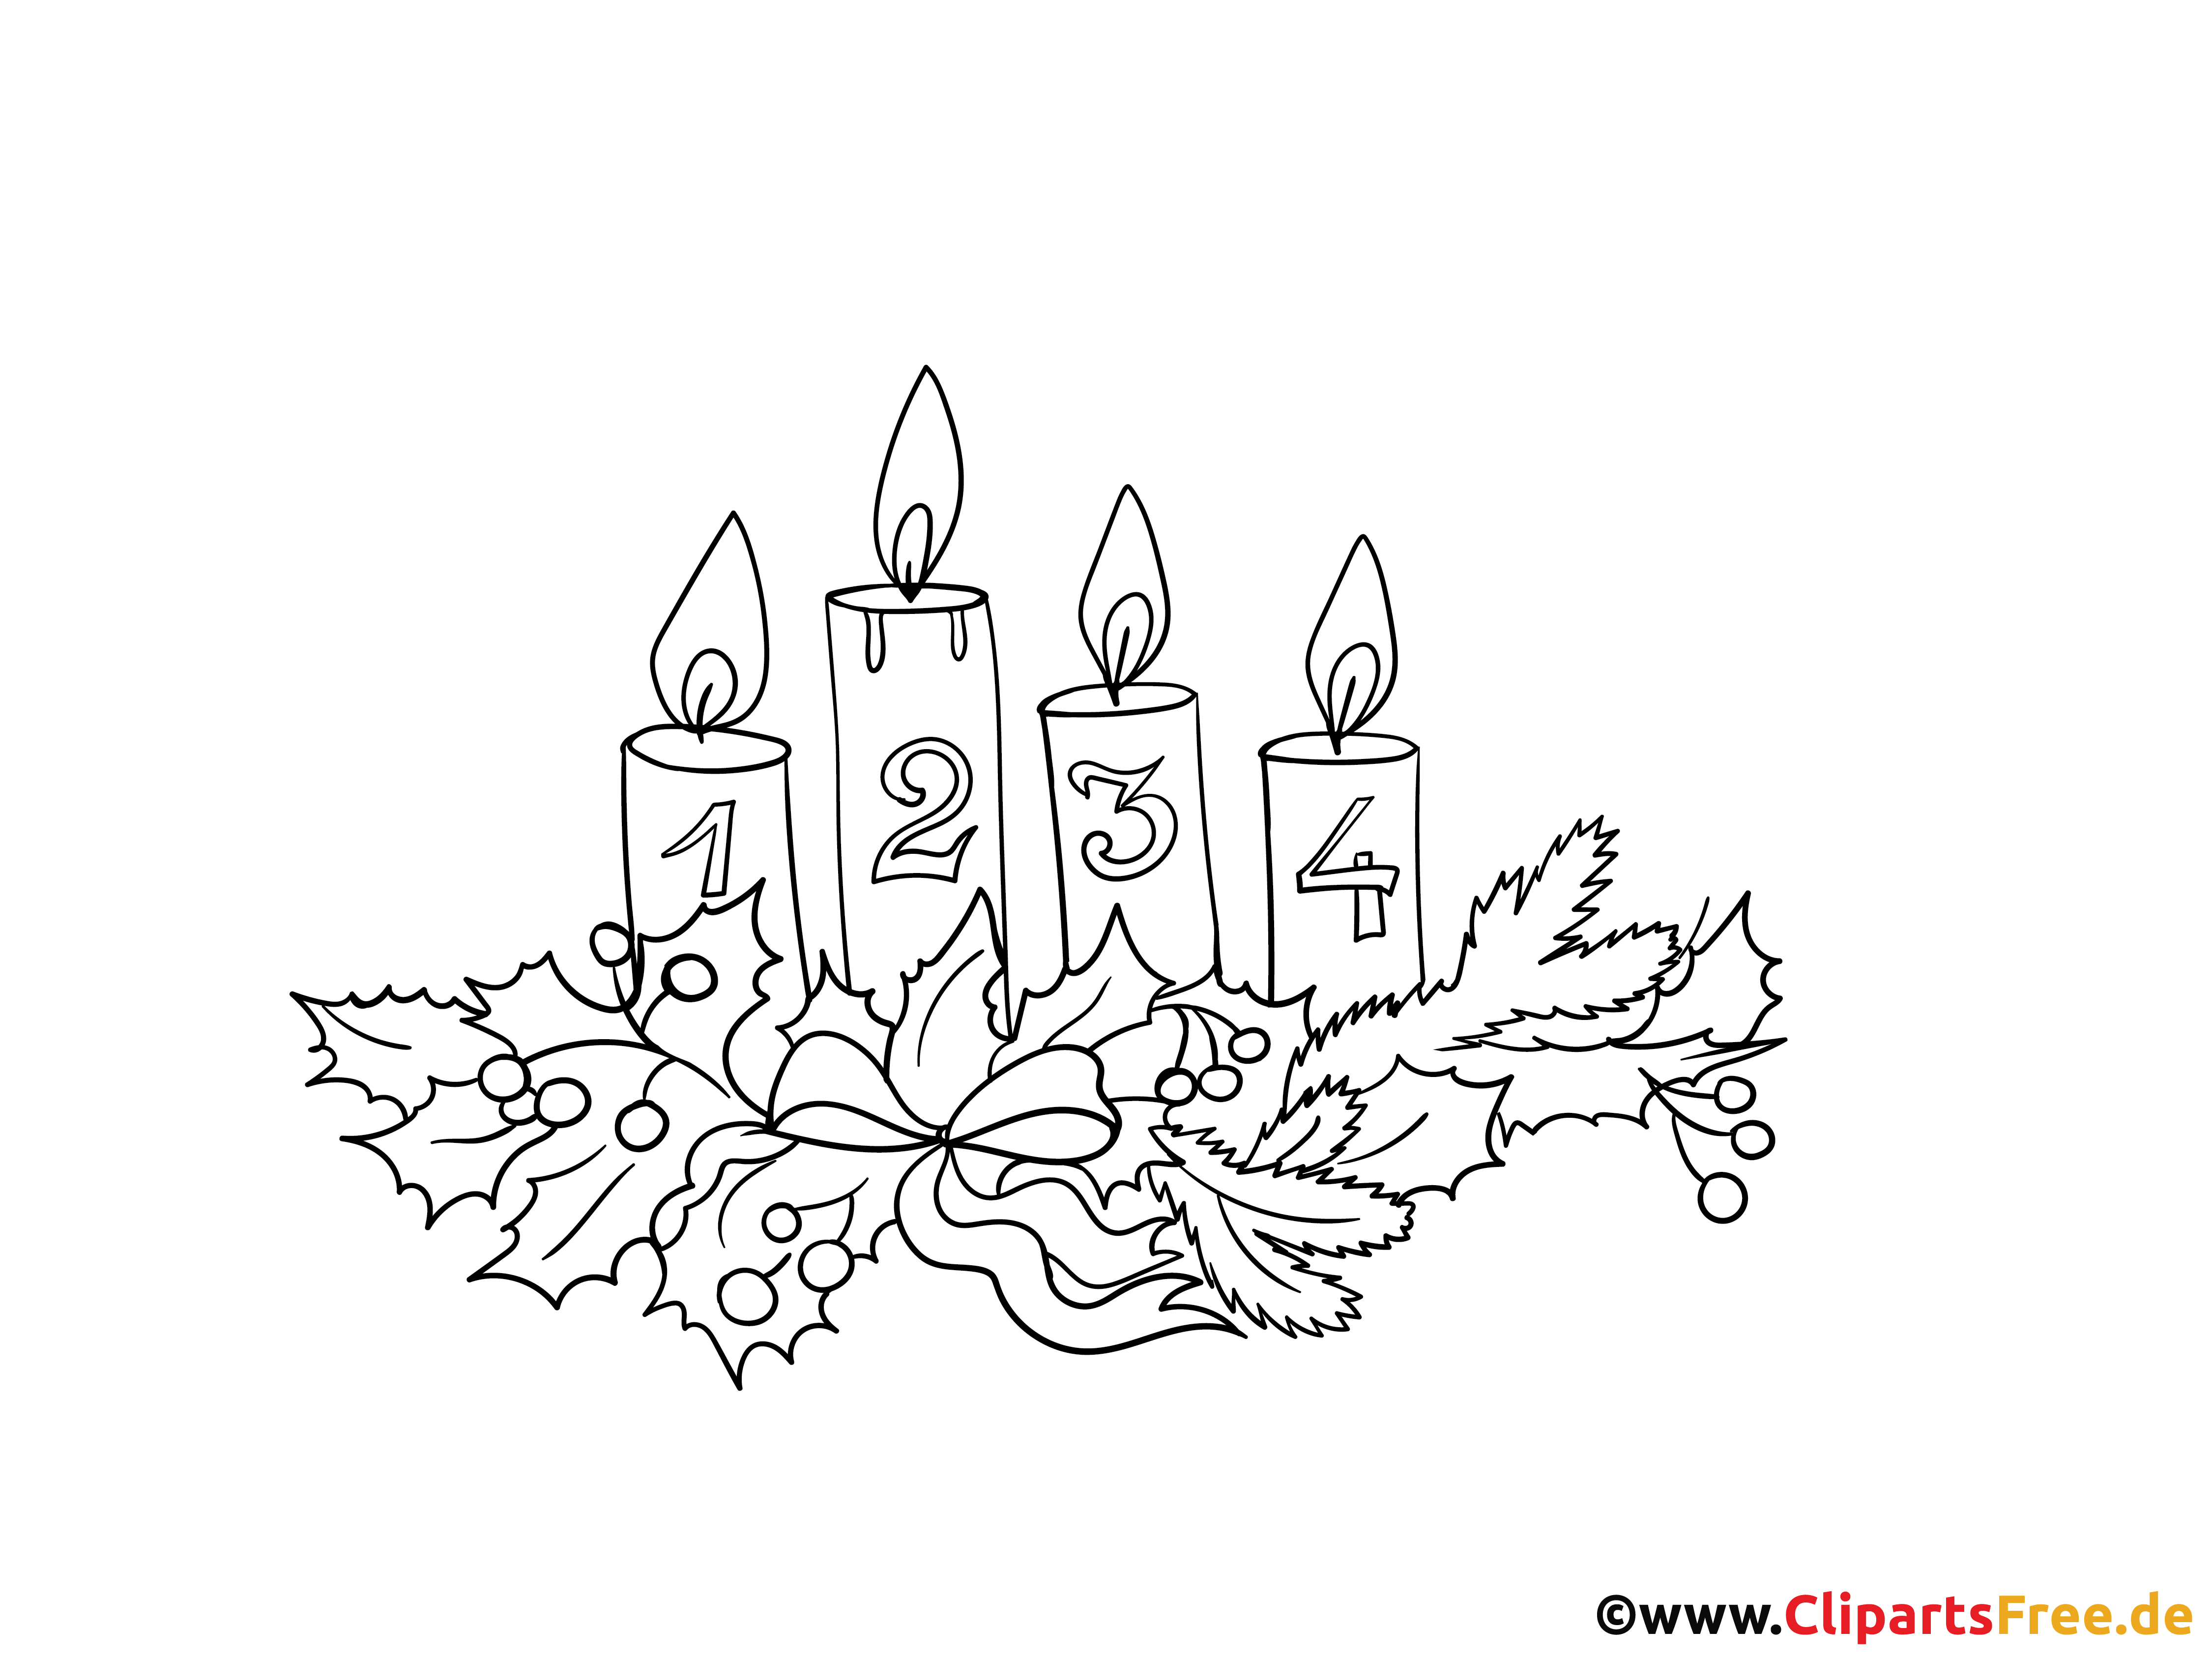 Free coloring page for Advent